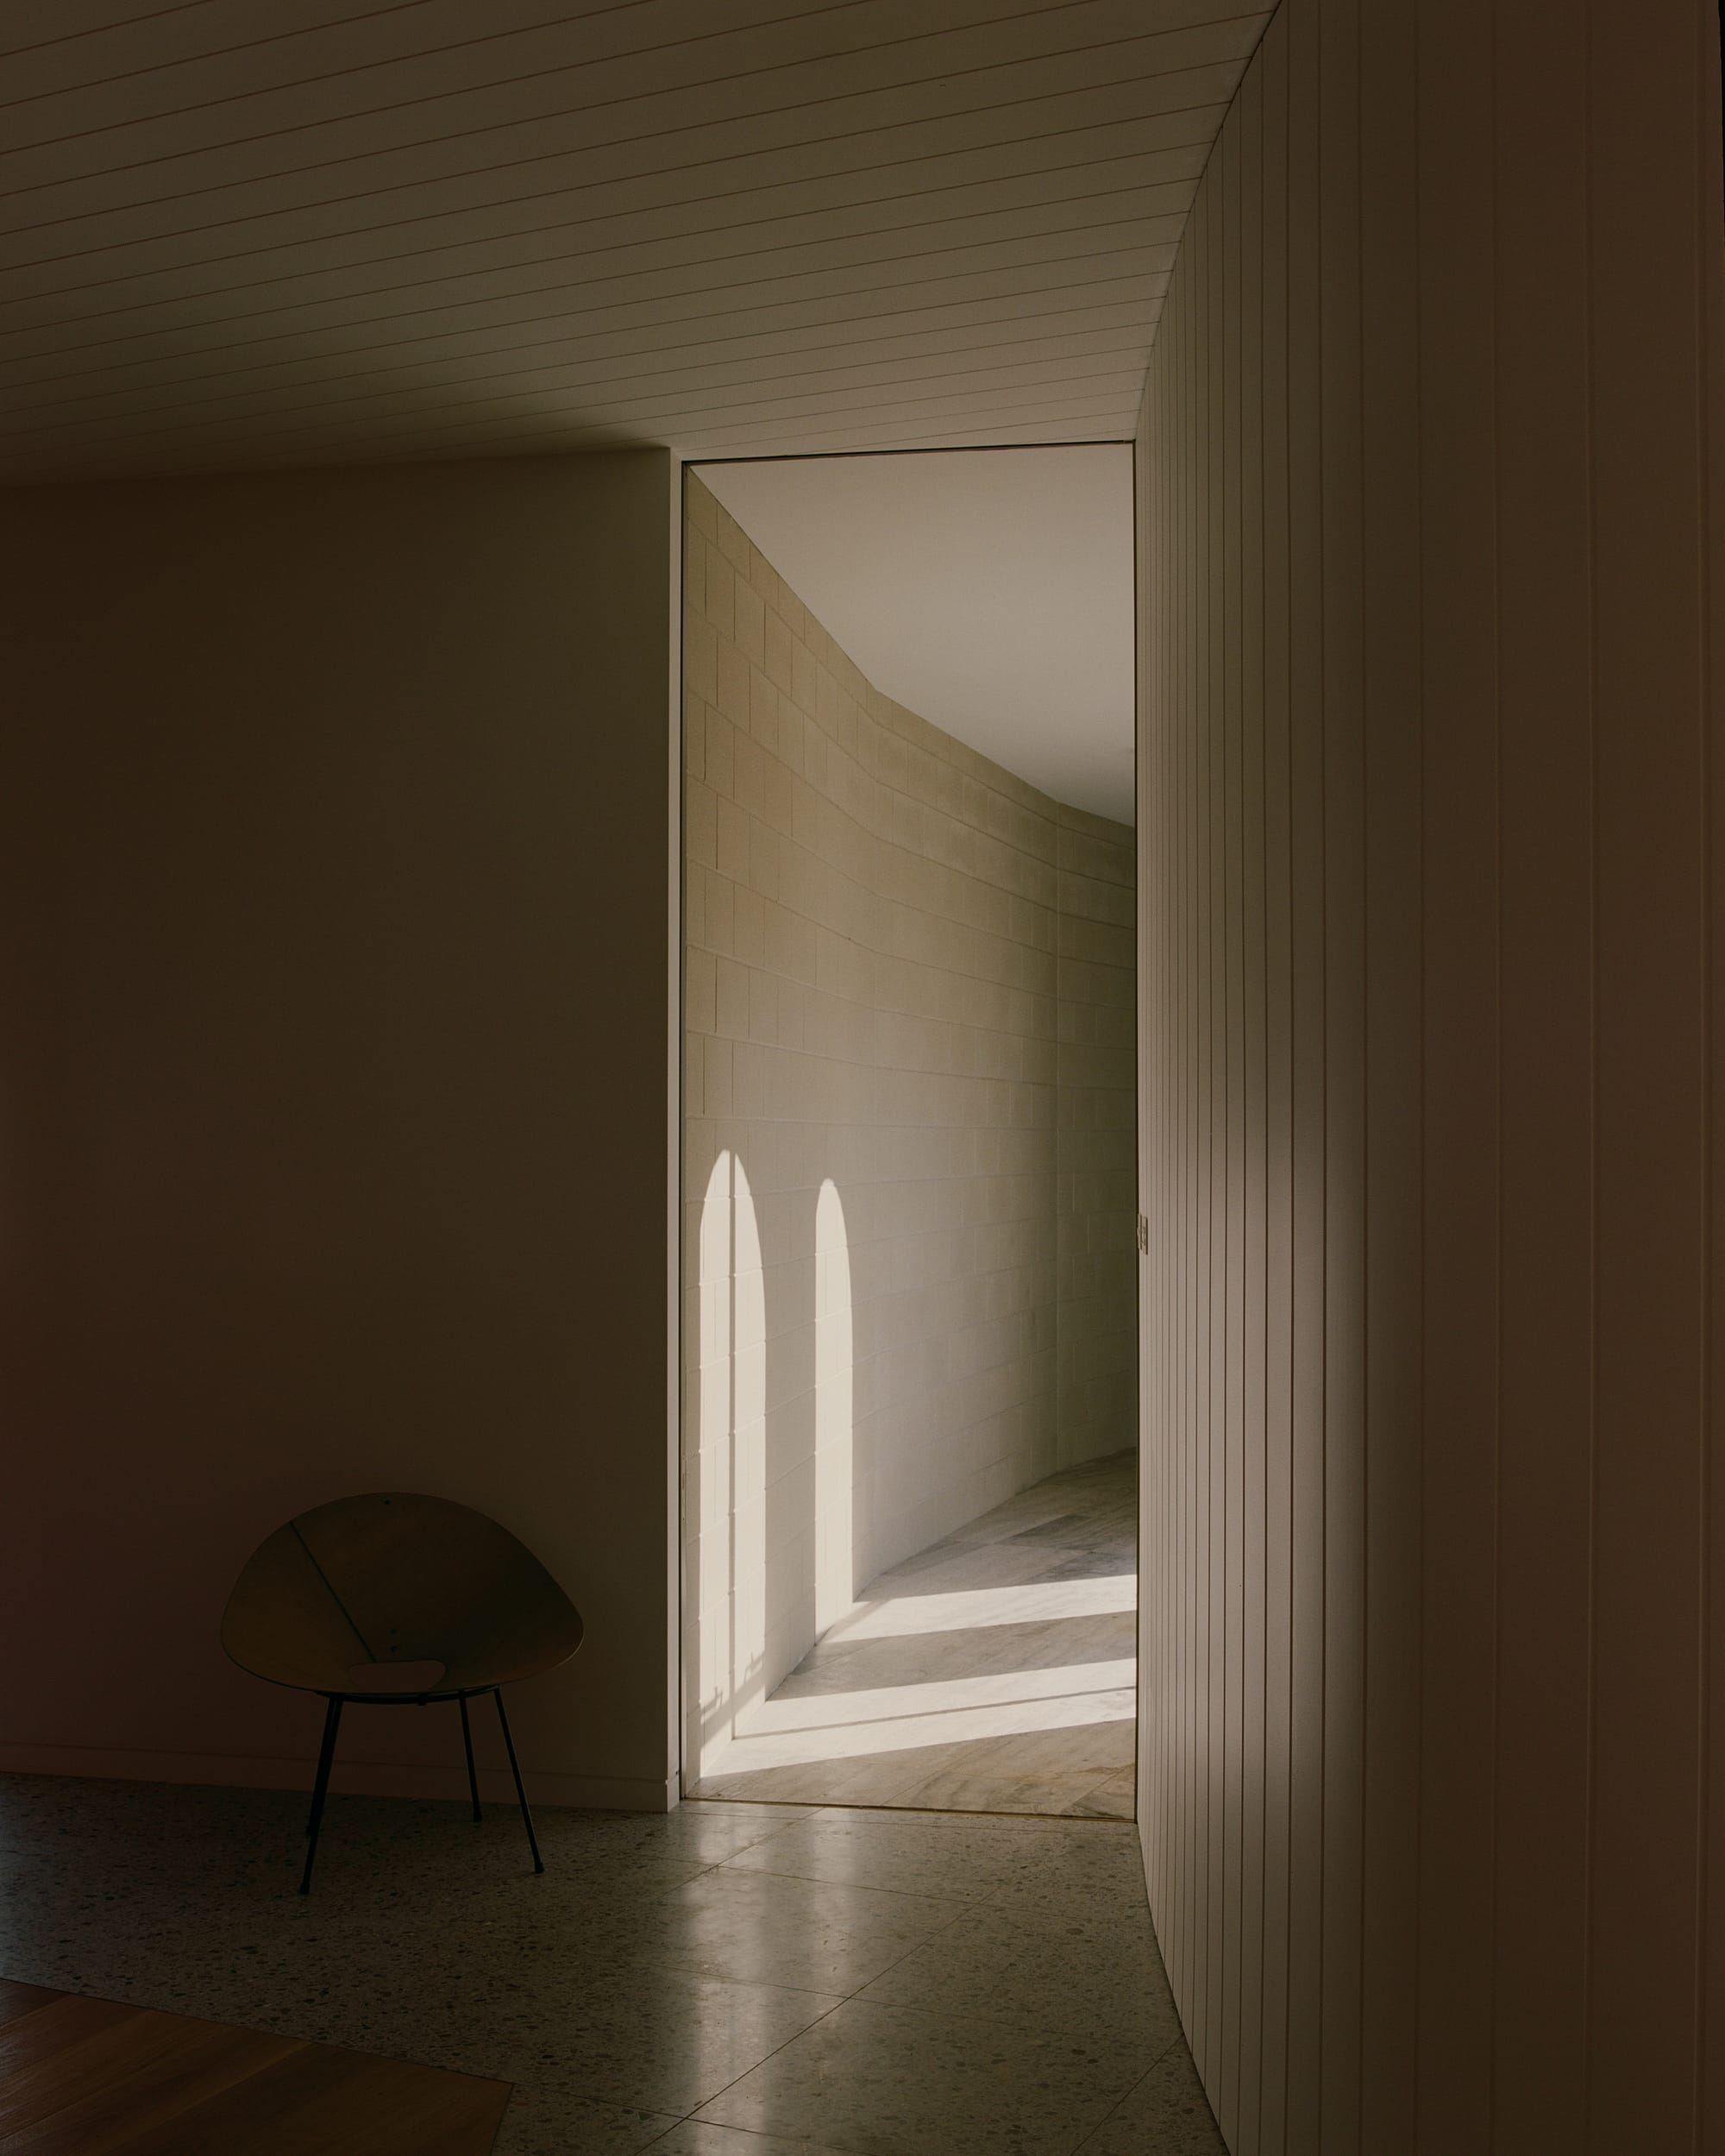 indoor corridor with white walls, featuring shadow patterns created by the sunlight coming through arched openings. A black chair is visible in the corner.